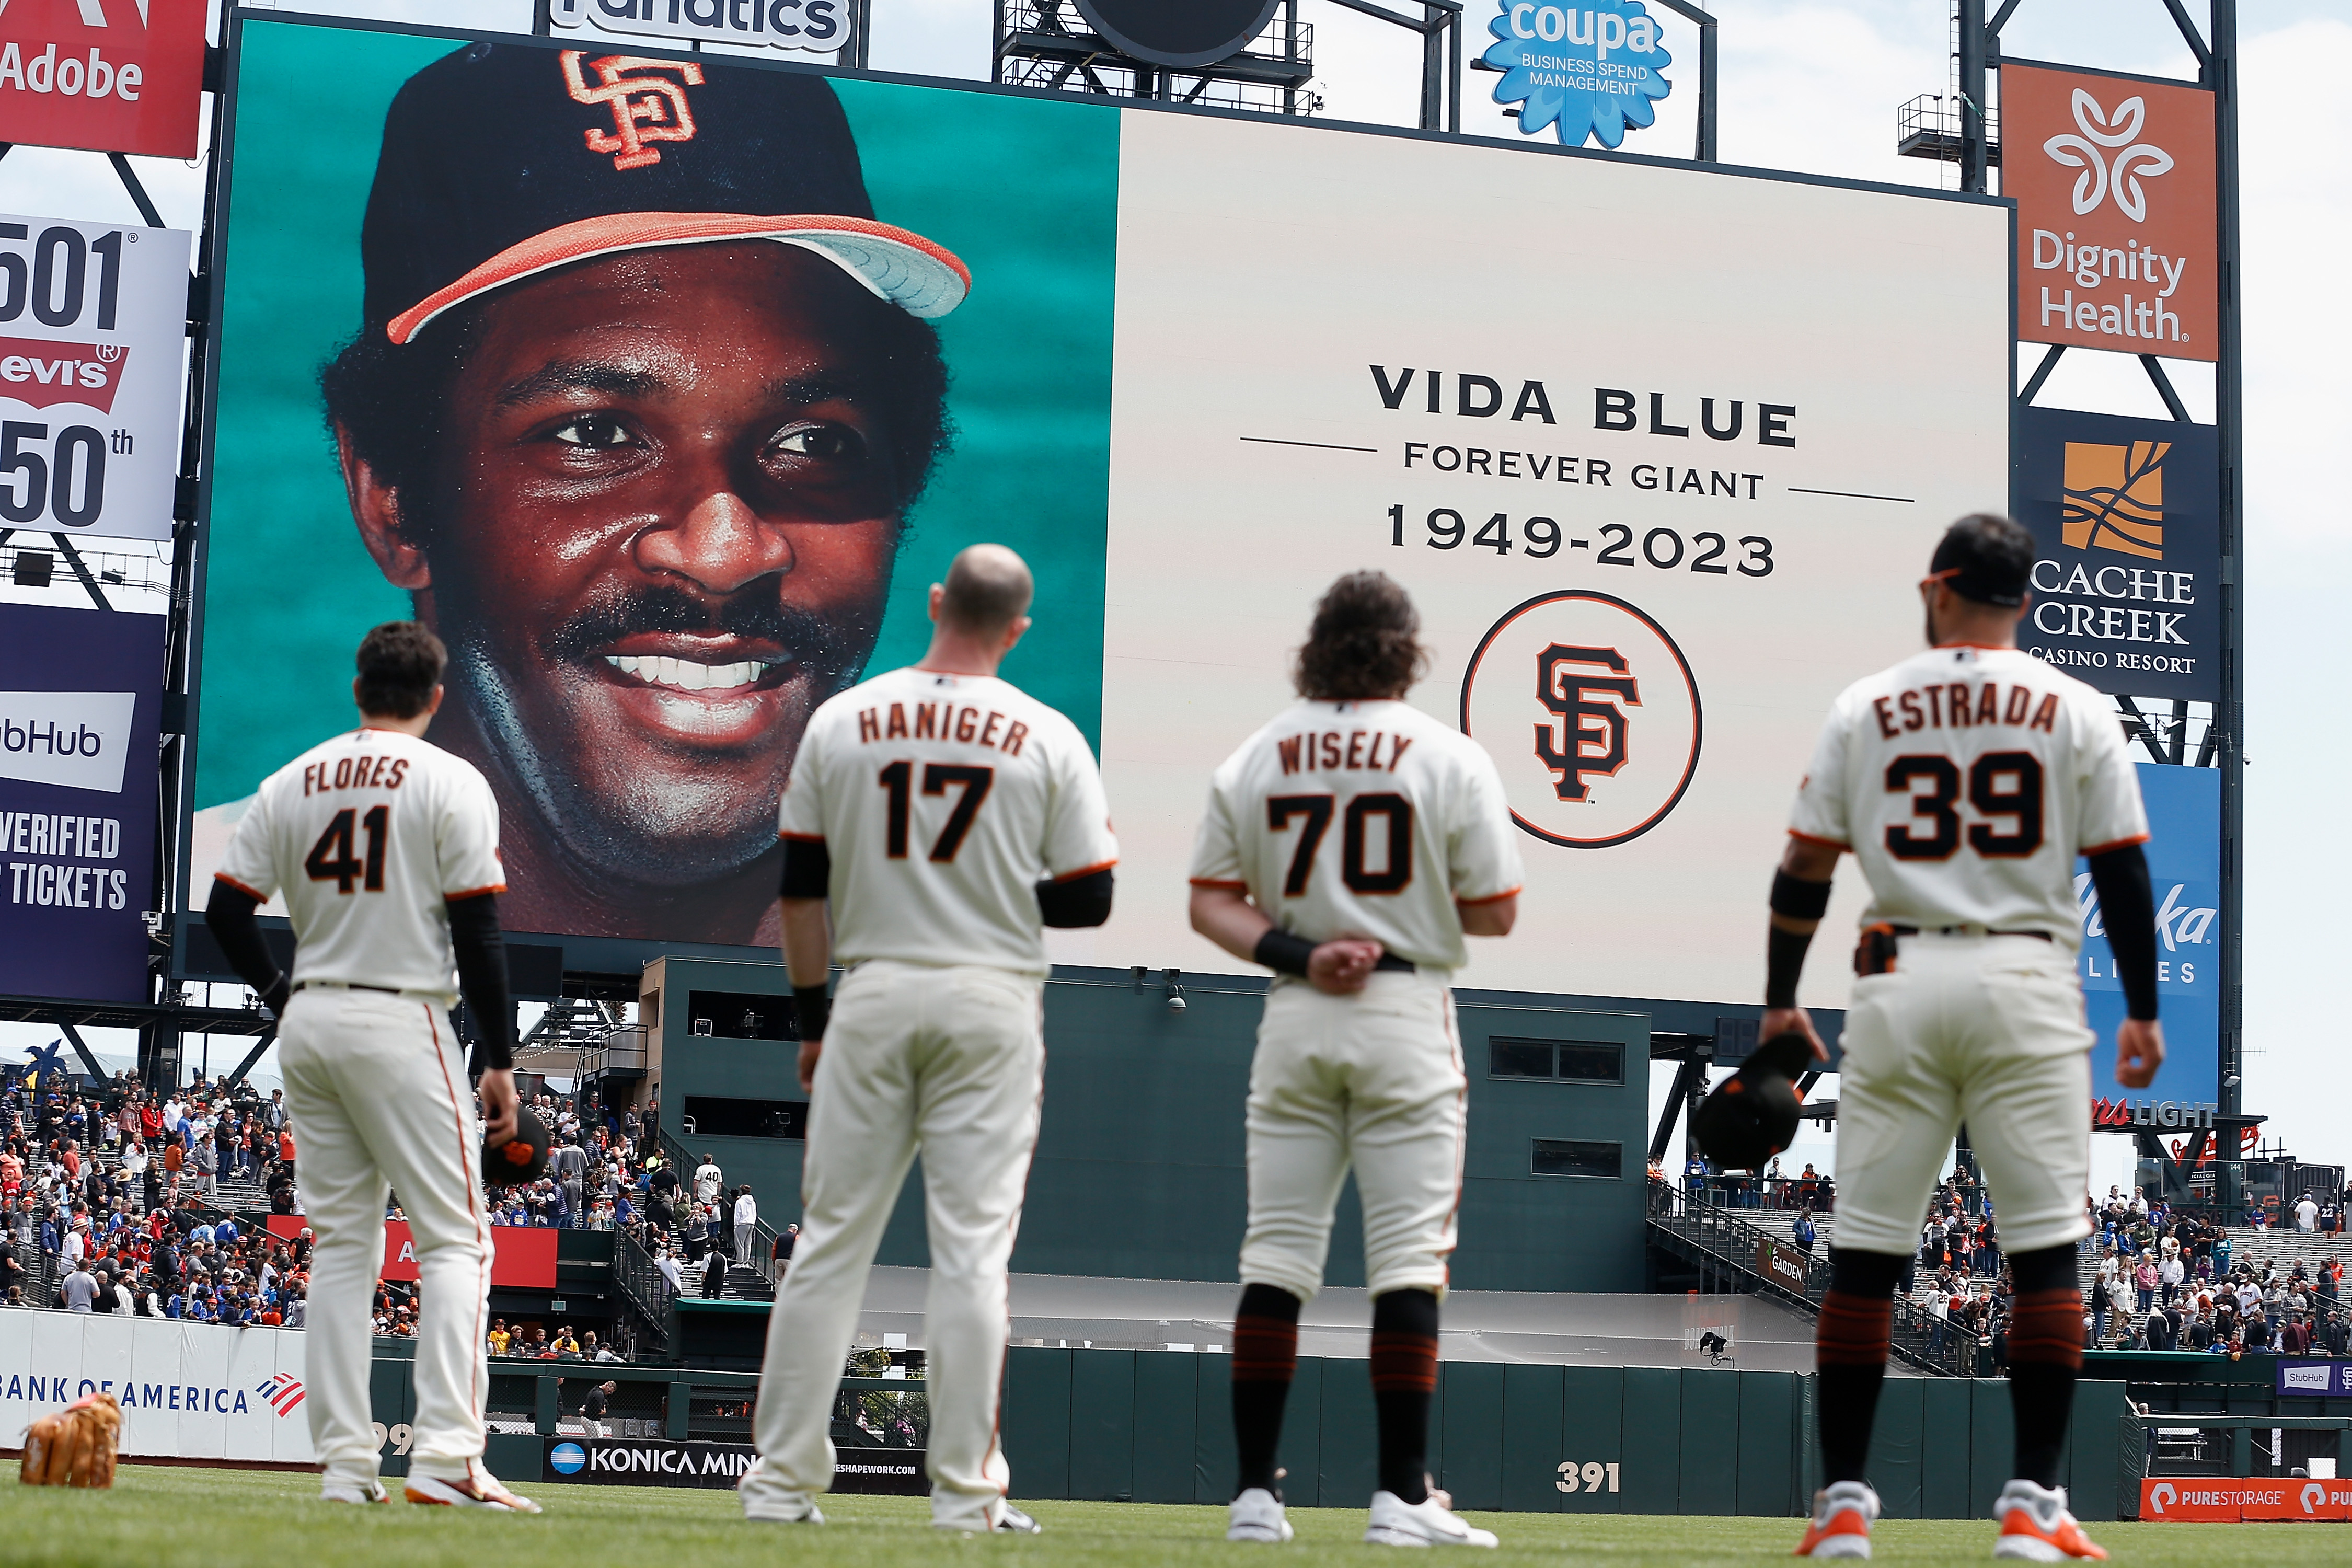 Players and fans pause for a moment of silence to recognize the passing of Vida Blue before the game between the San Francisco Giants and the Milwaukee Brewers at Oracle Park, on May 7, 2023, in San Francisco, California. | Source: Getty Images